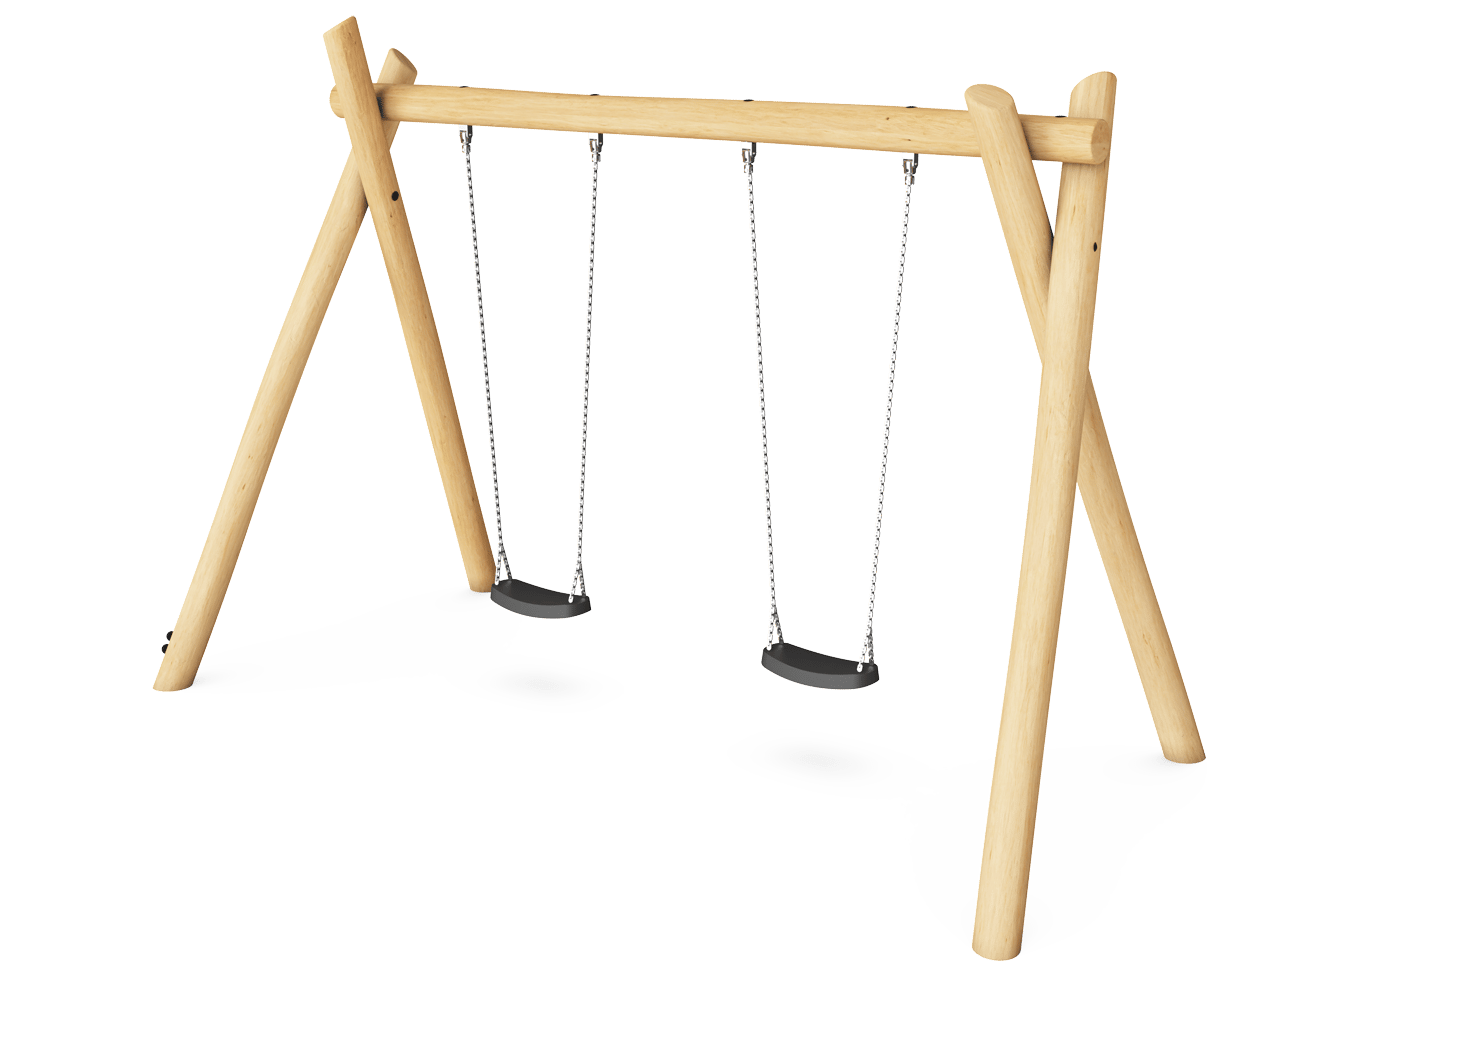 Two Seat Swing